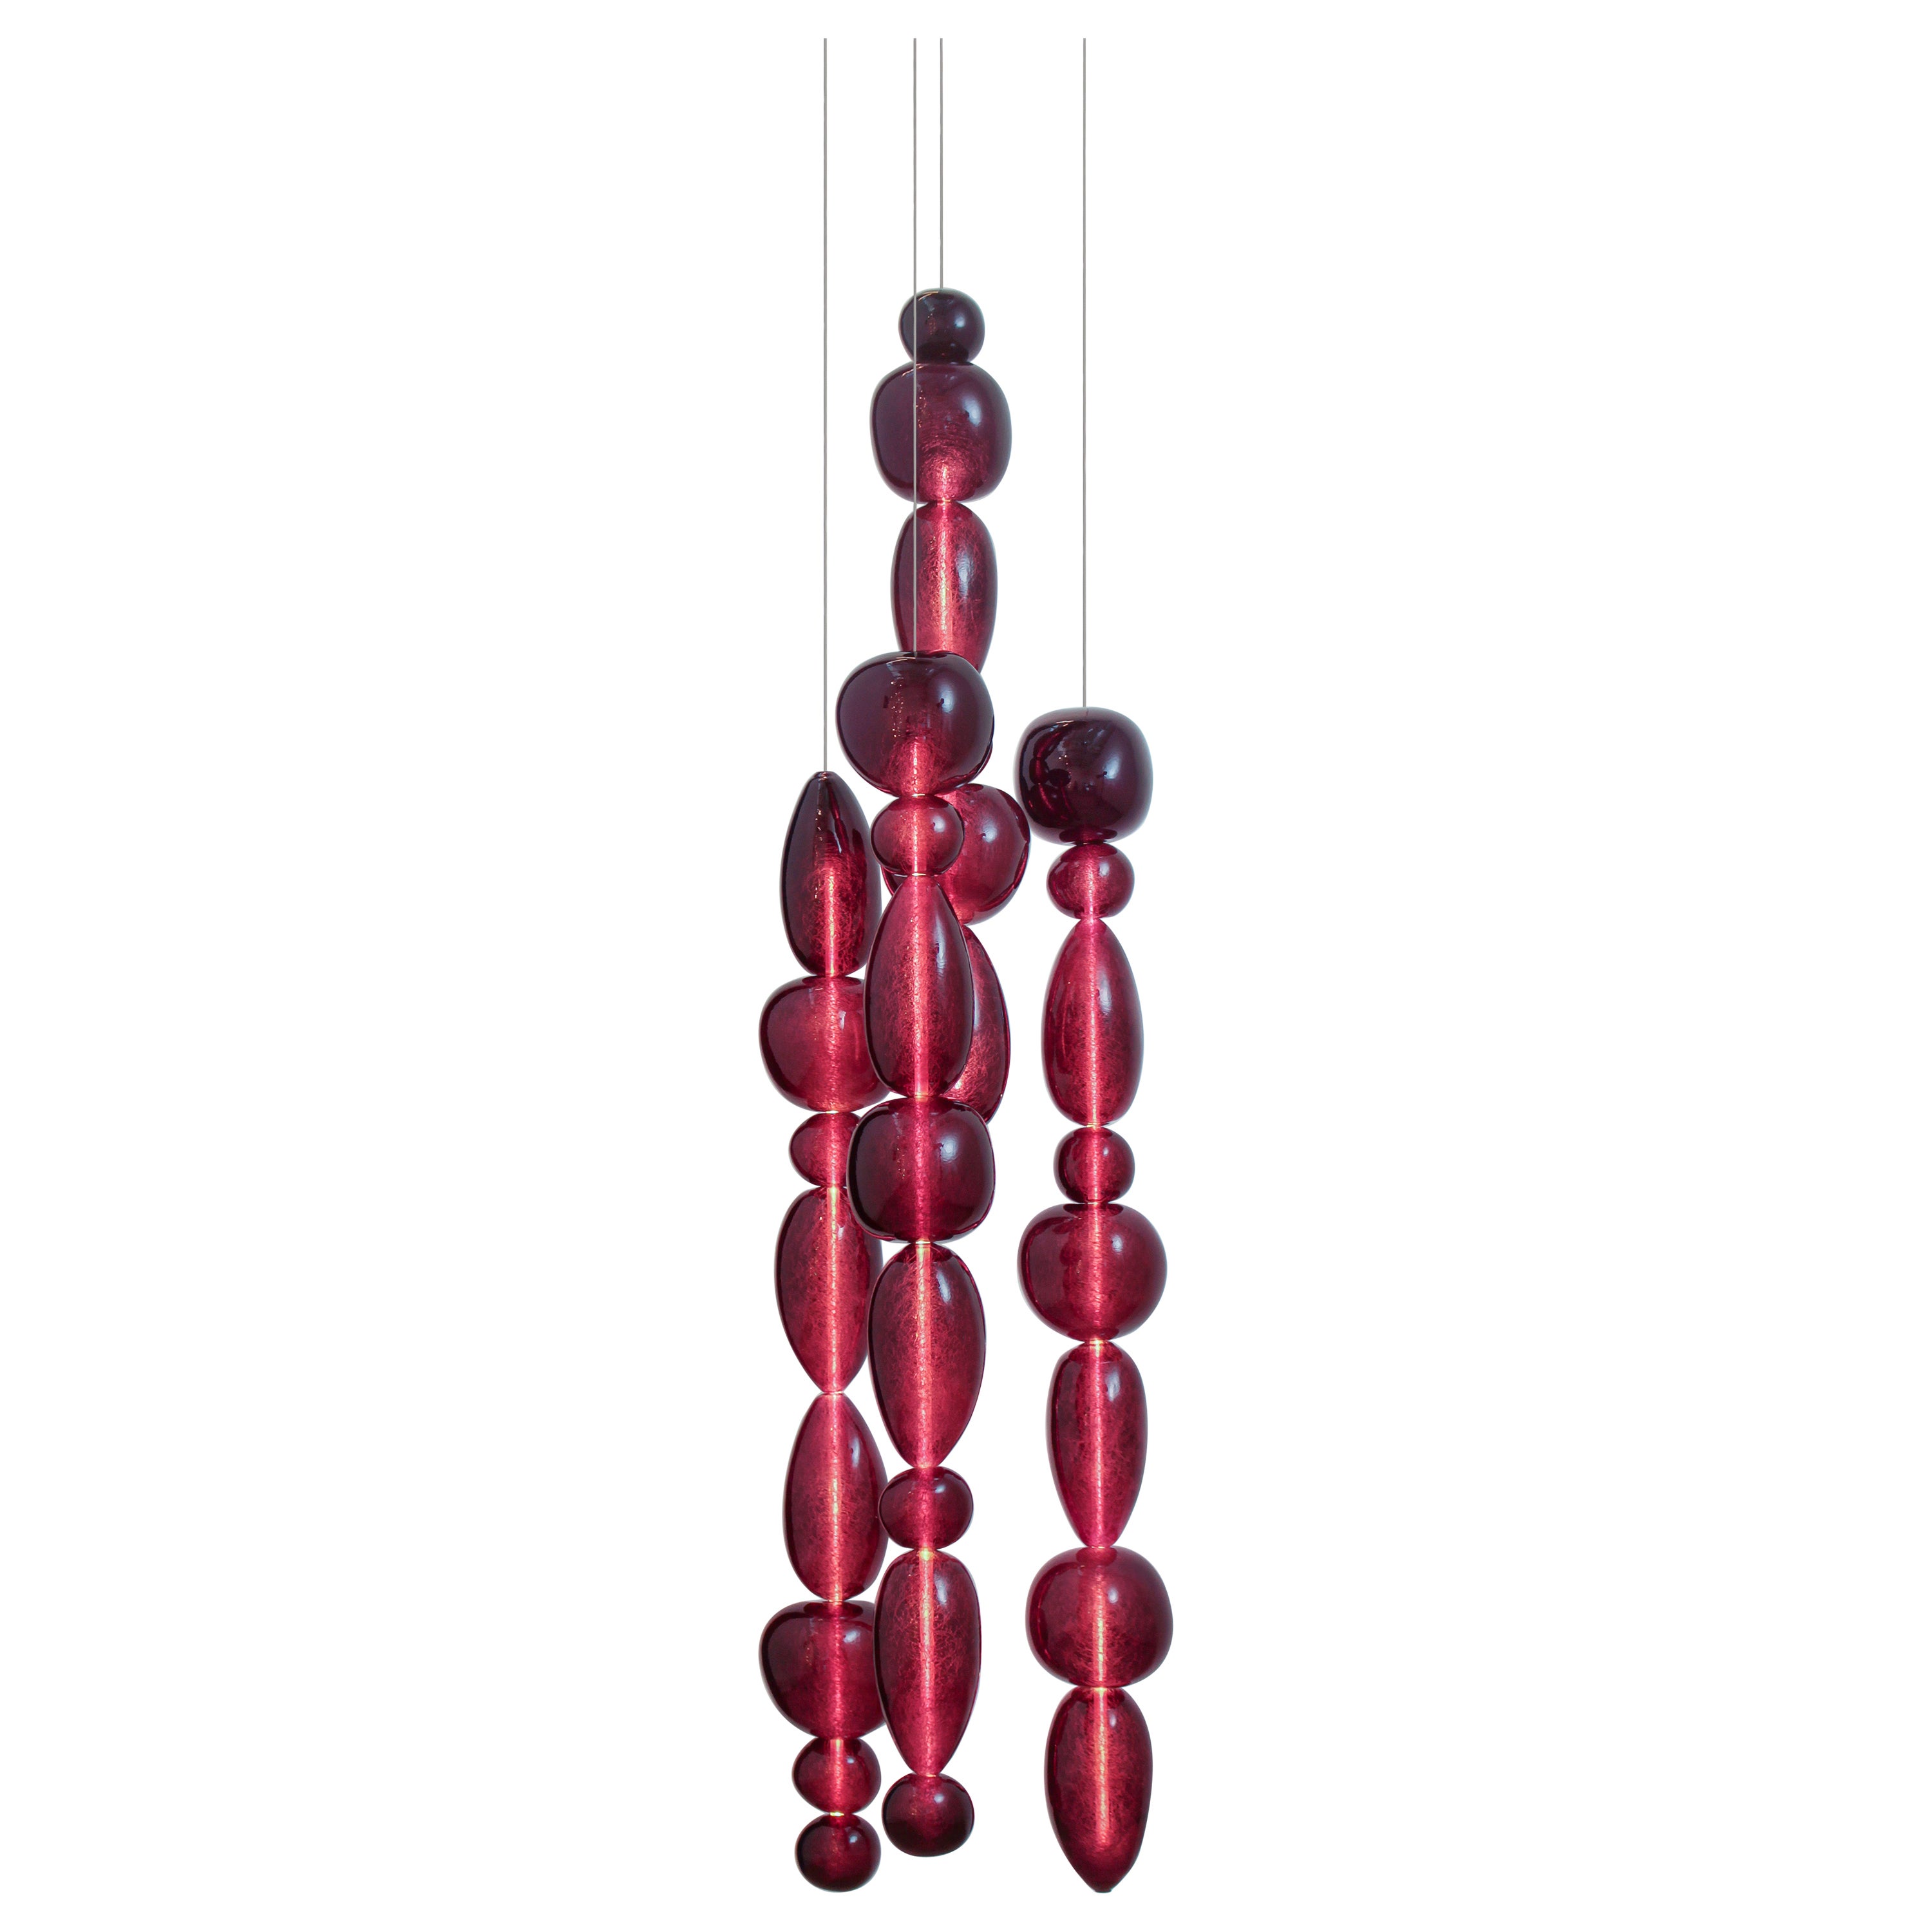 Chavana Contemporary Glass Pendant Light in Plum by Concept Verre For Sale